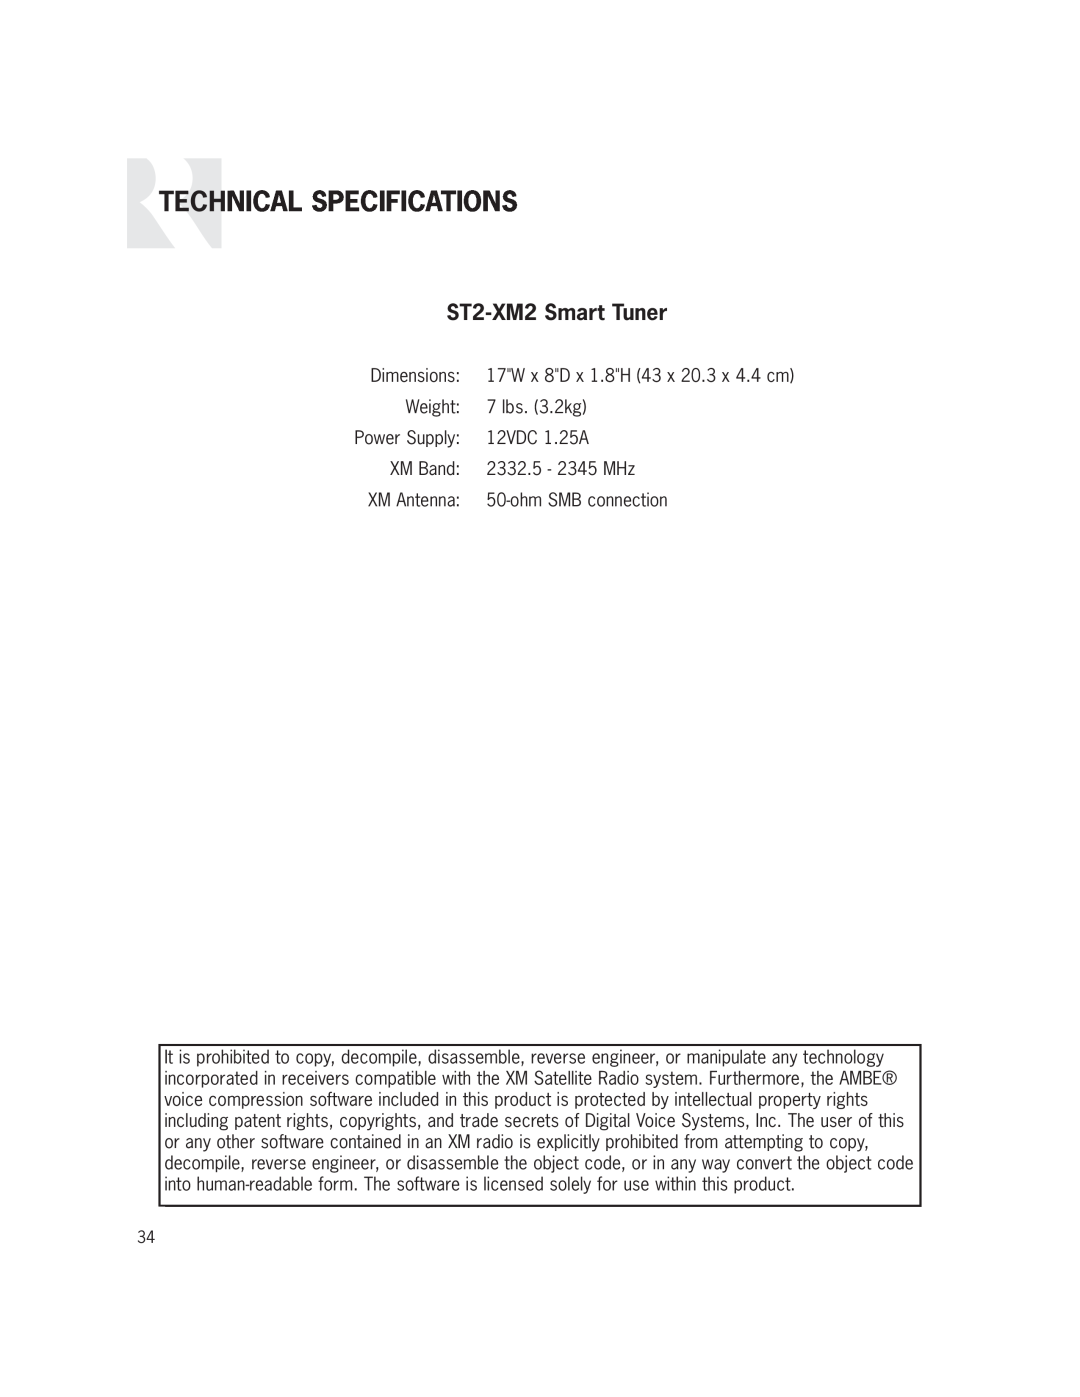 Russound manual Technical Specifications, ST2-XM2Smart Tuner 